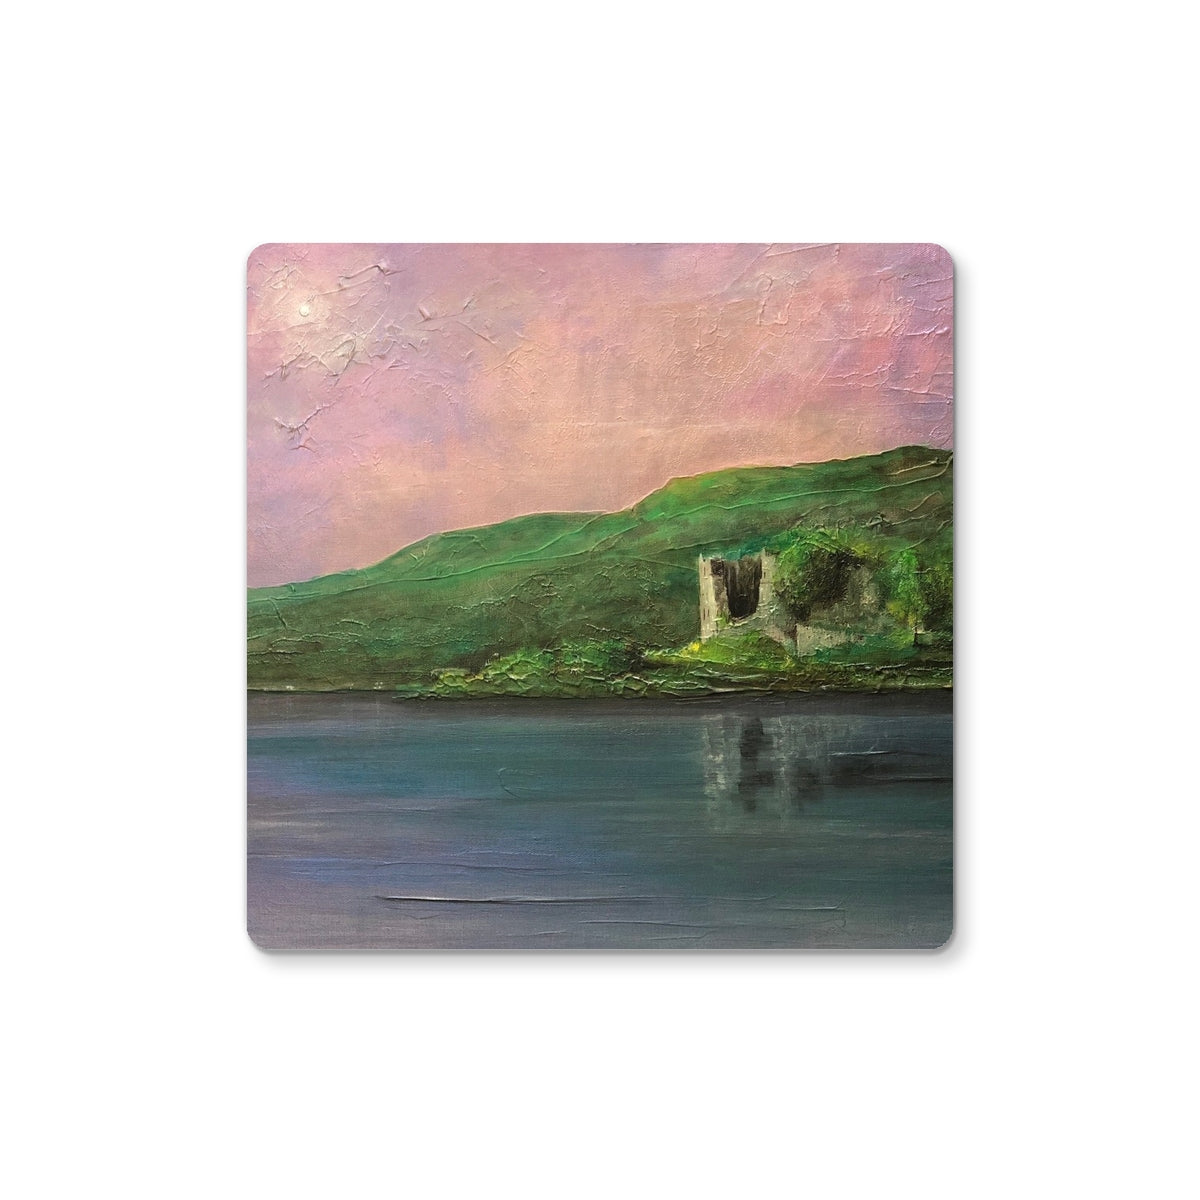 Old Castle Lachlan Art Gifts Coaster-Homeware-Prodigi-6 Coasters-Paintings, Prints, Homeware, Art Gifts From Scotland By Scottish Artist Kevin Hunter